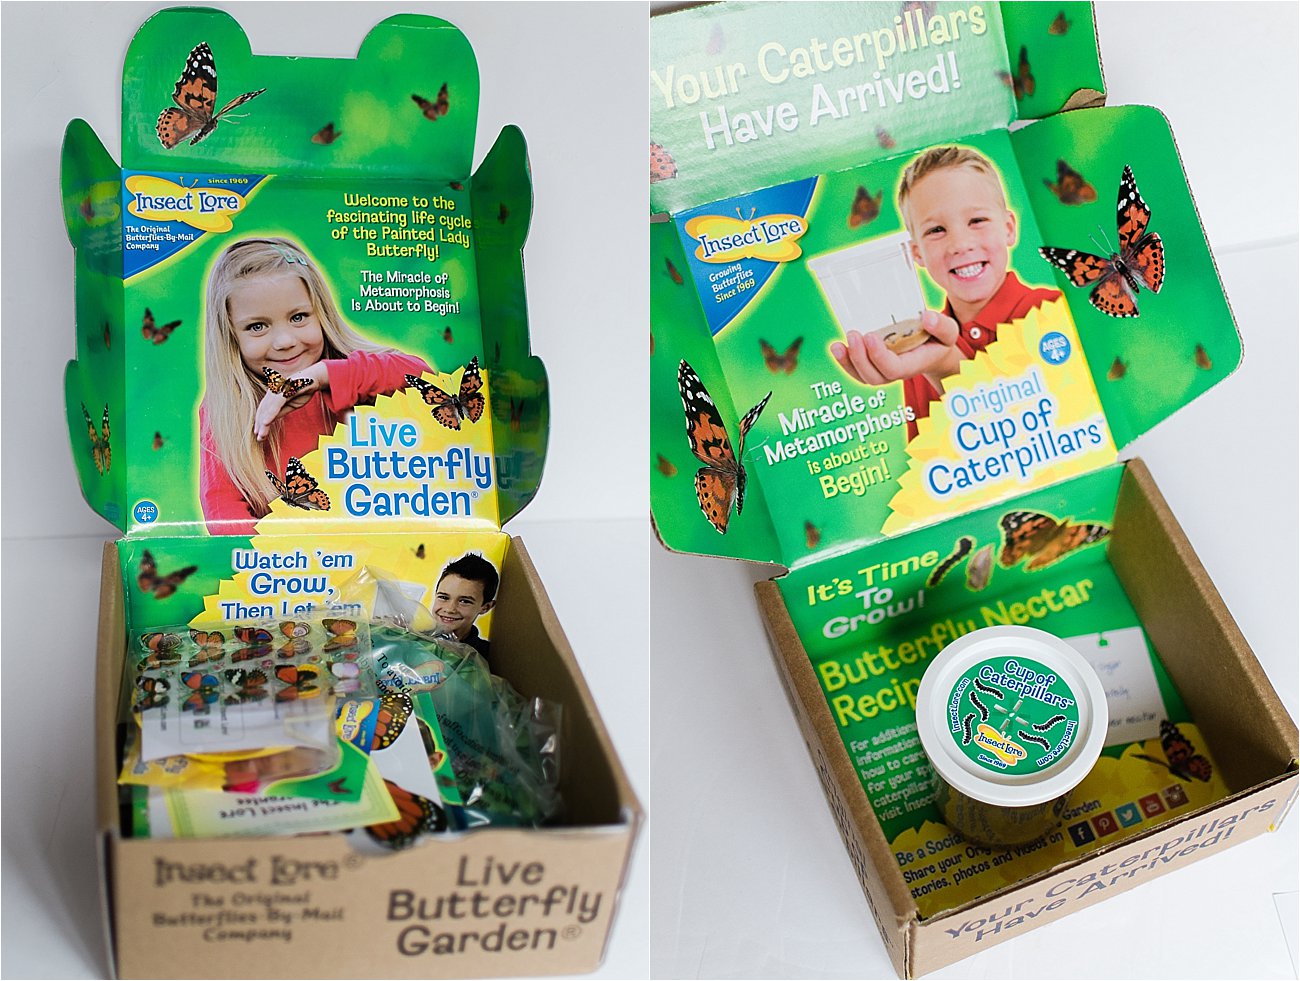 "Growing Butterflies at Home" - Insect Lore Original Butterfly Garden Review by lifestyle blogger Still Being Molly